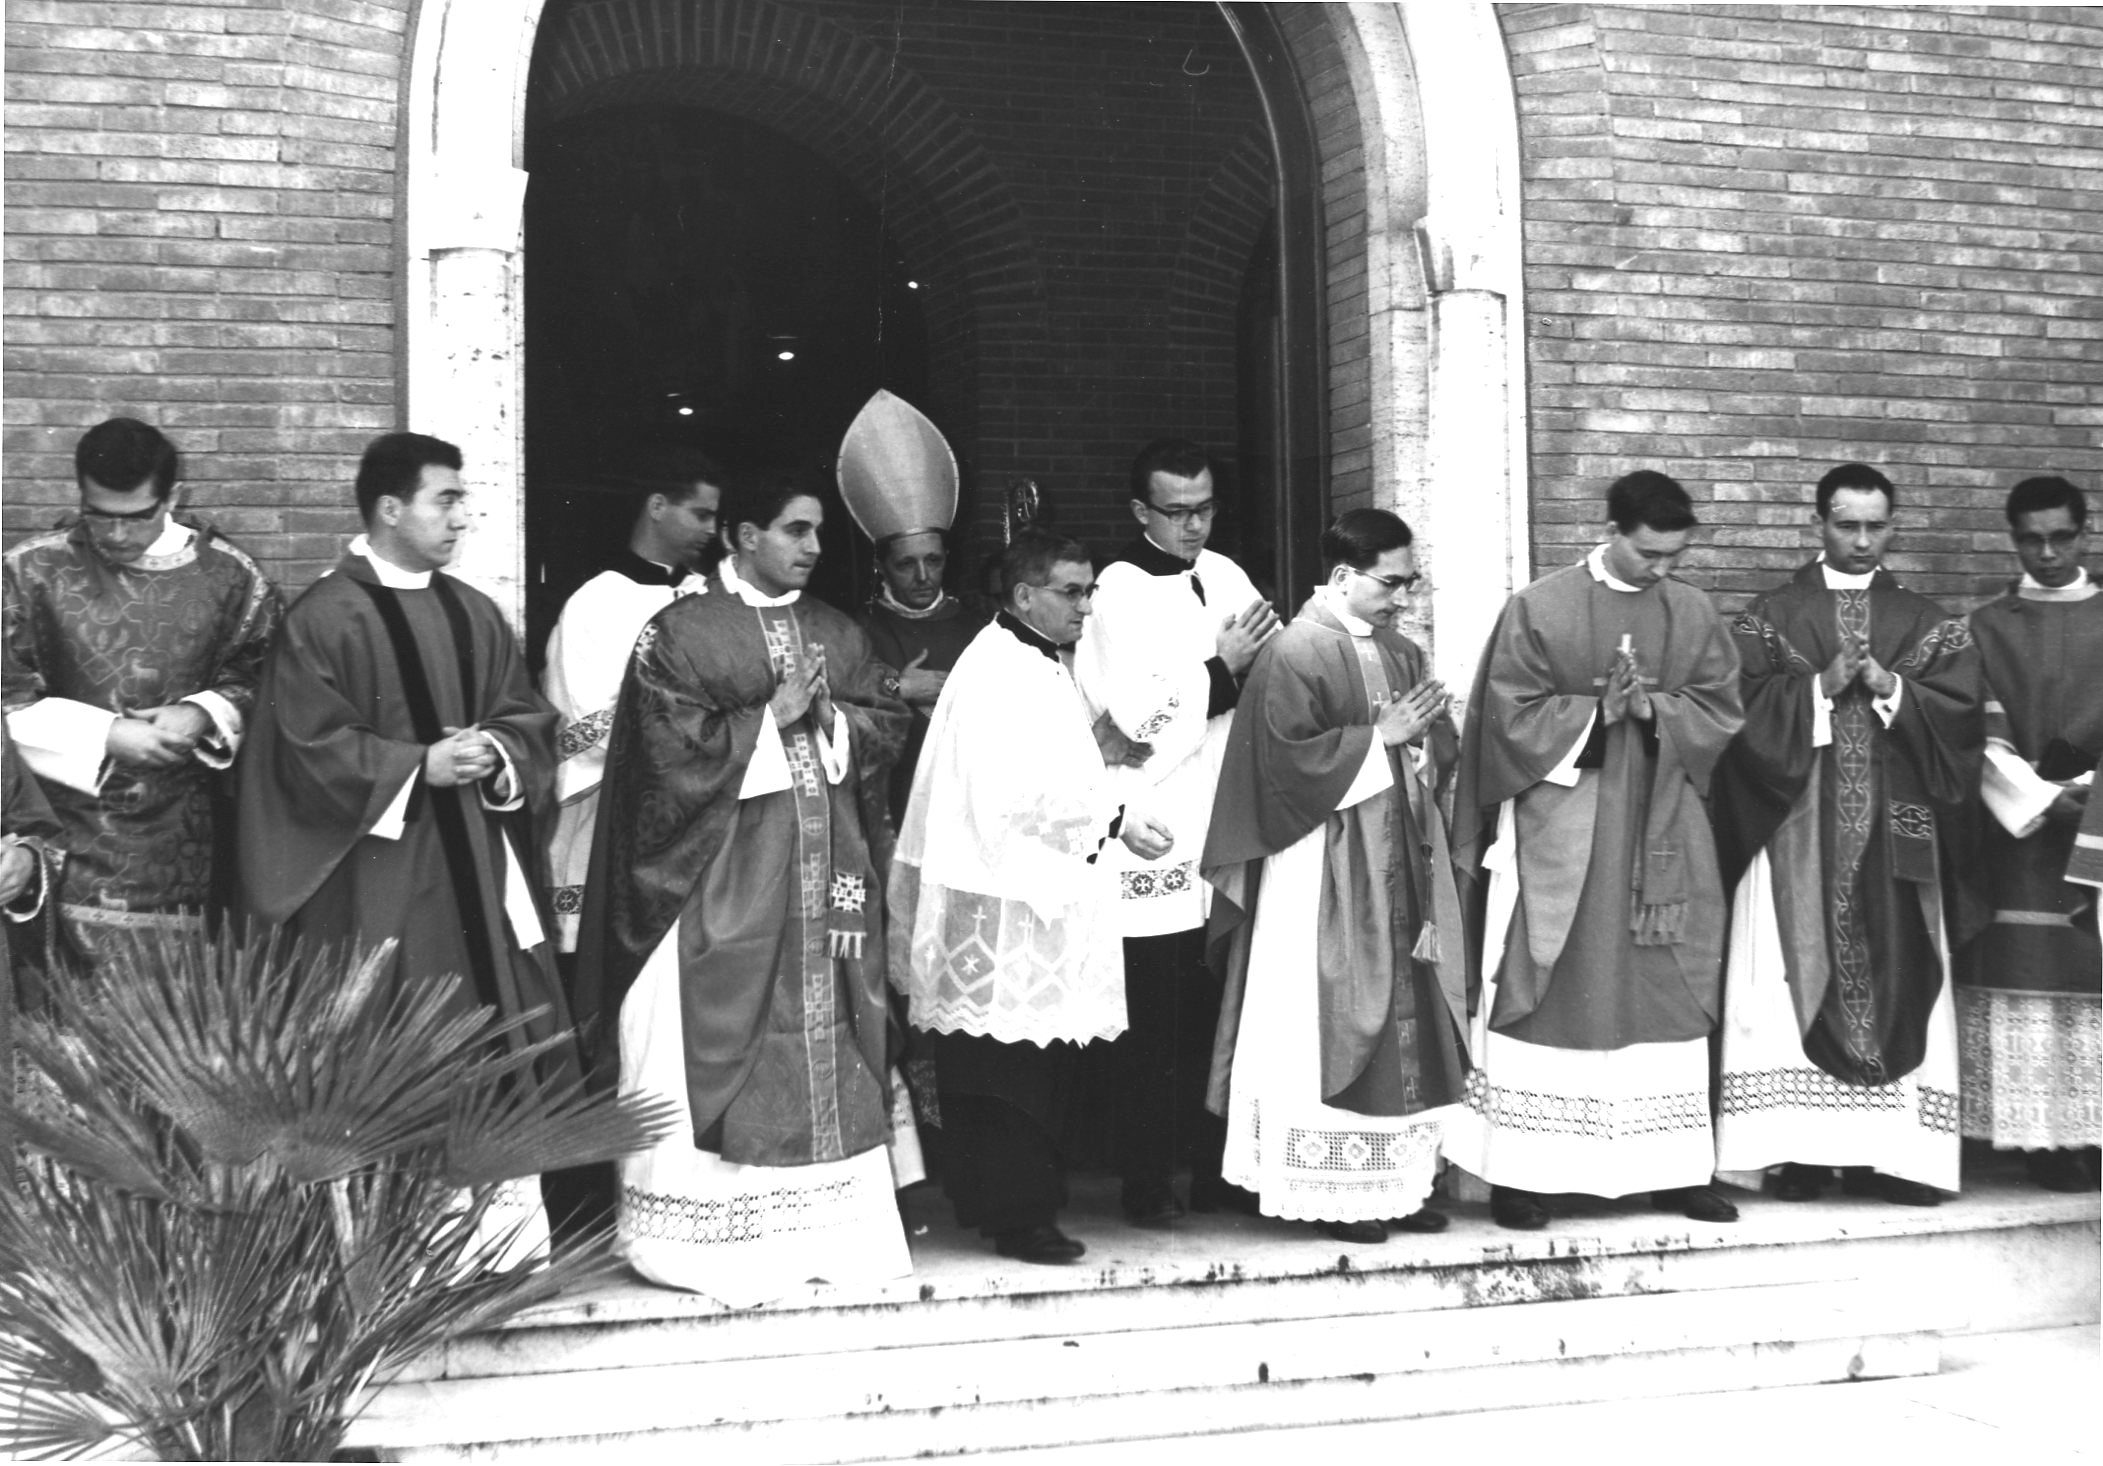 Ordination day in Rome, December 17, 1966. Fr. Tony Russo is pictured second from the left; classmate Fr. Peter Mastrobuono, who died on July 27, 2016, is next to him. Also among the SCJs ordained that day was Bishop Virginio Bressanelli who went on to become superior general of the congregation. 